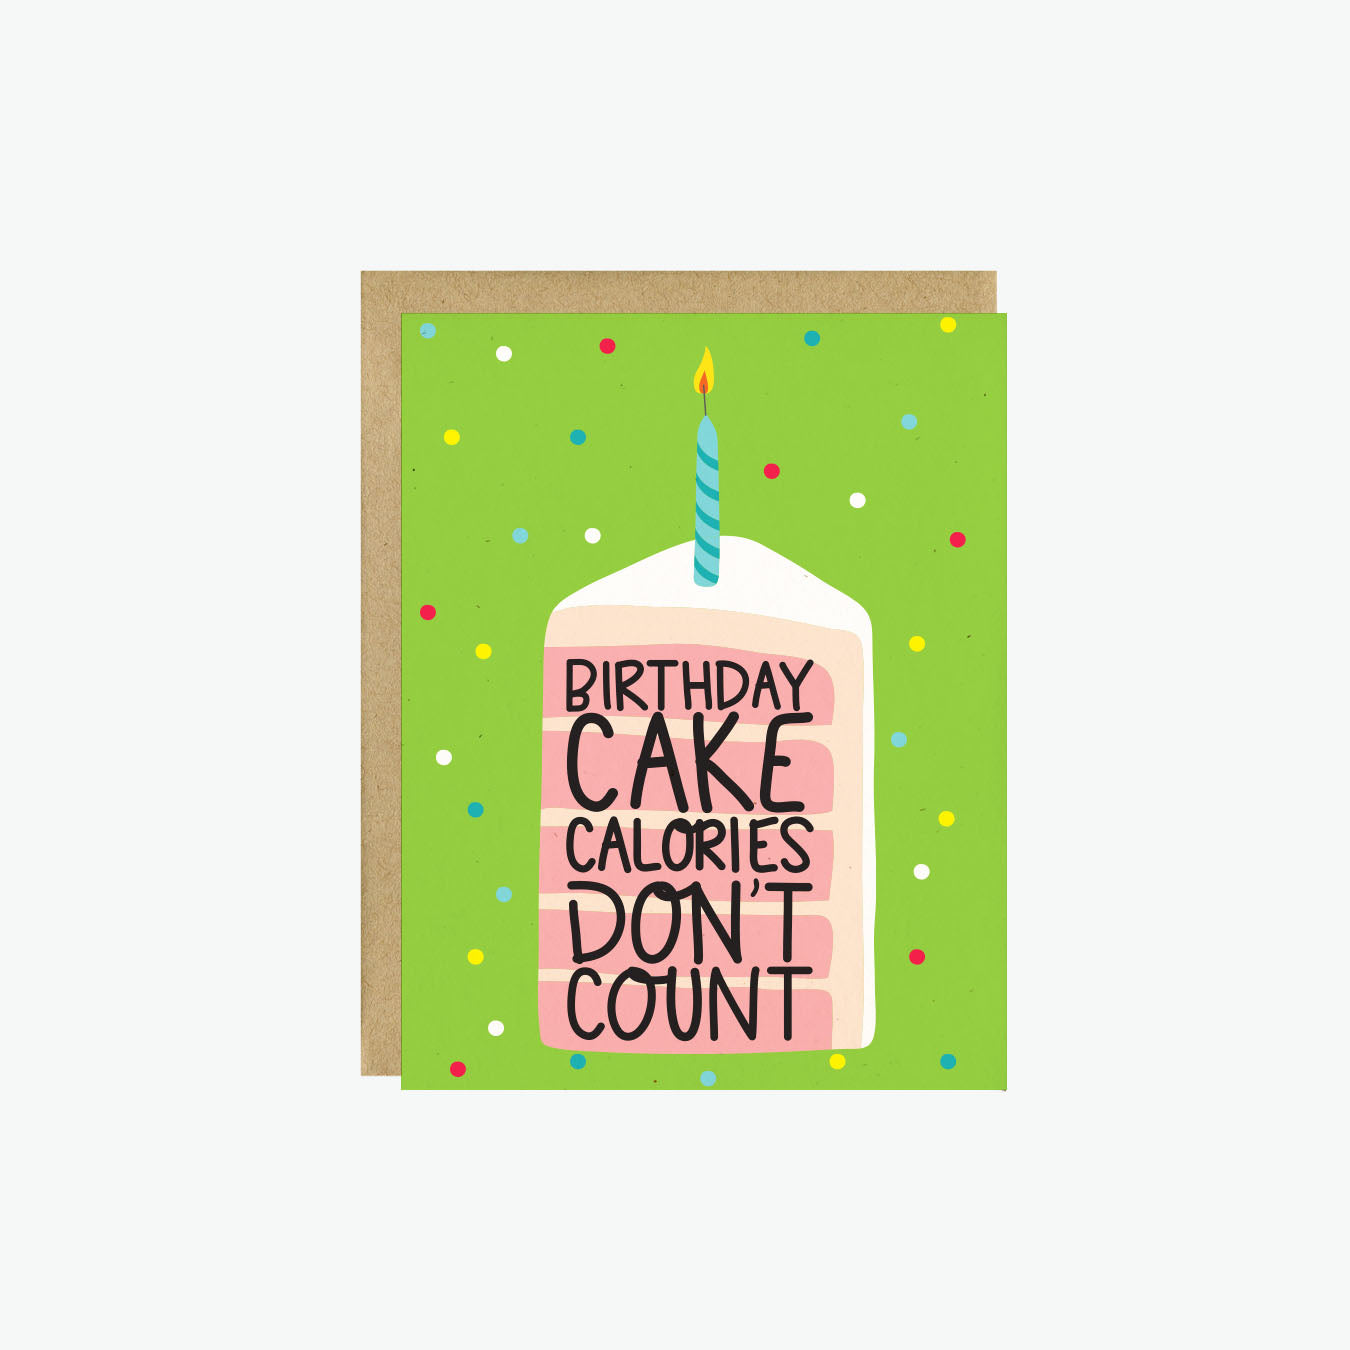 Birthday Cake Calories Don't Count Birthday Card, Funny Birthday Card